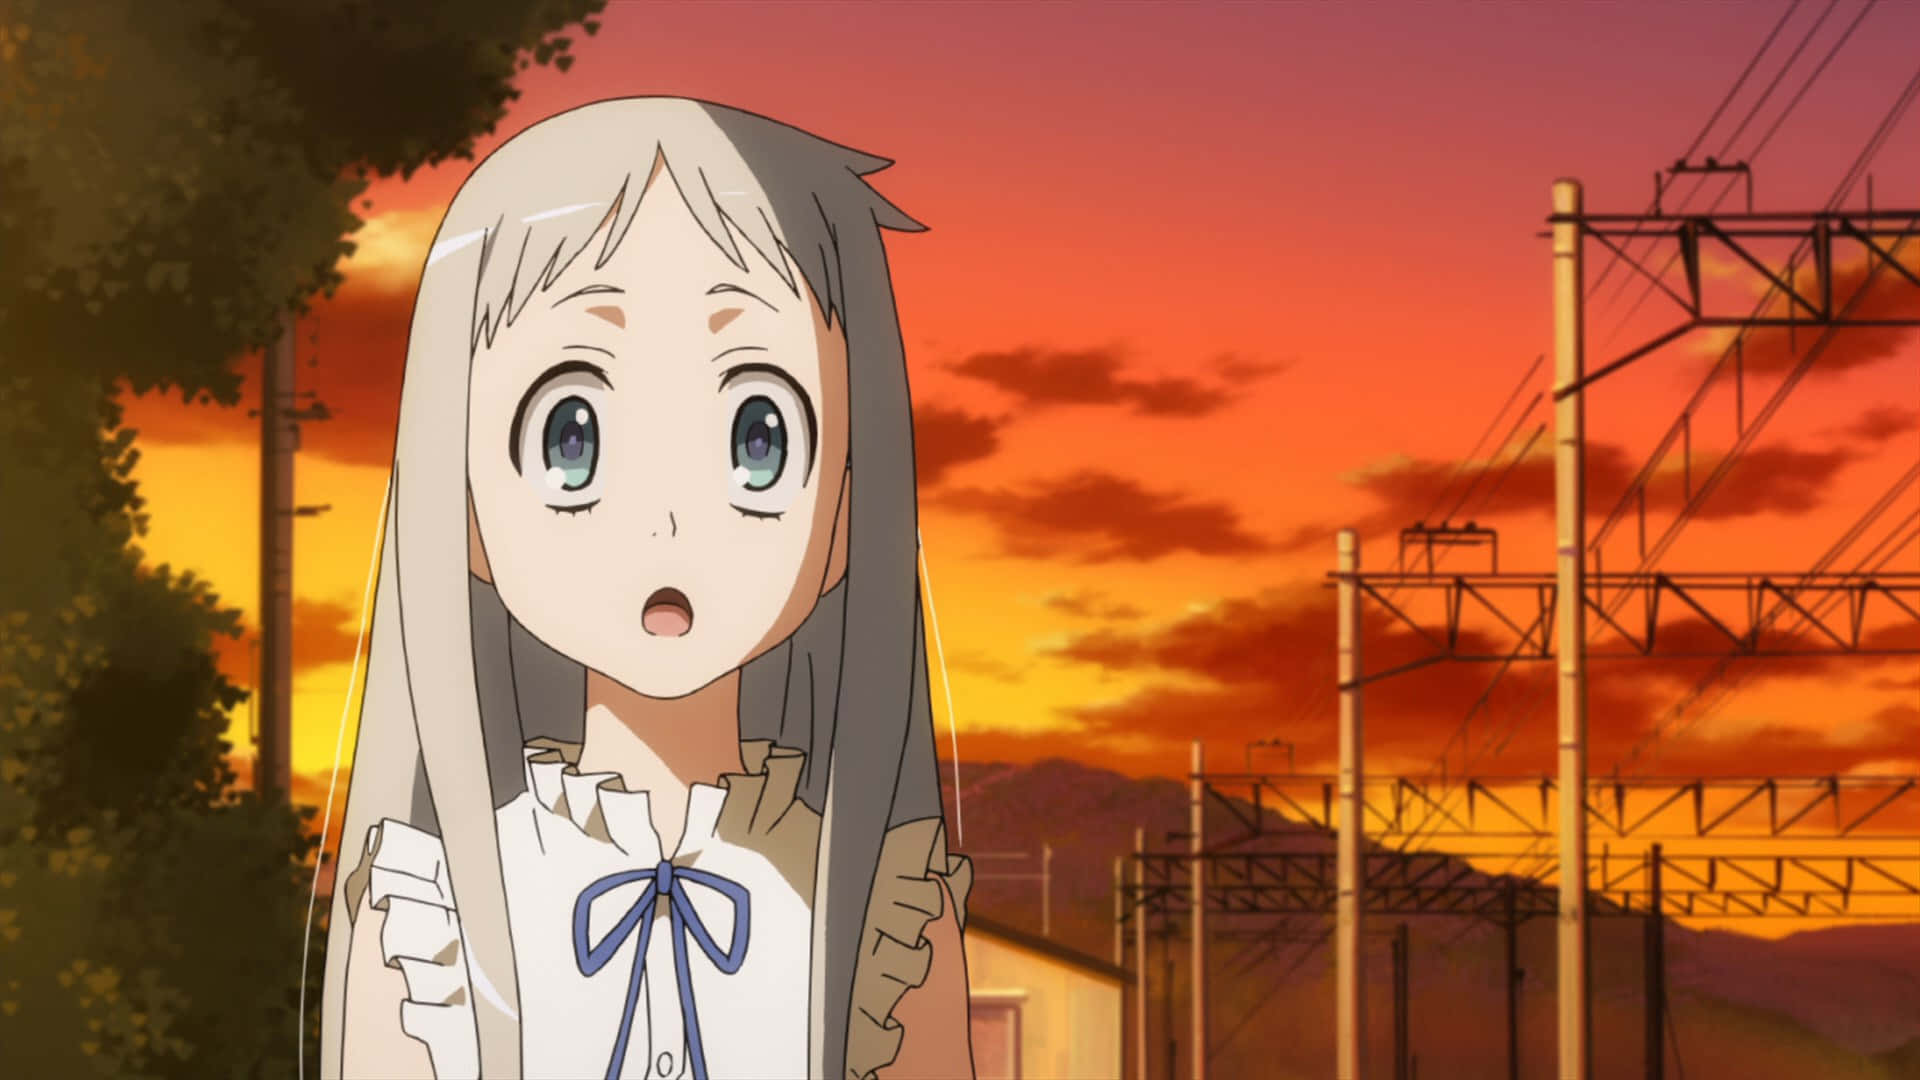 Hold on to those special memories with Anohana!